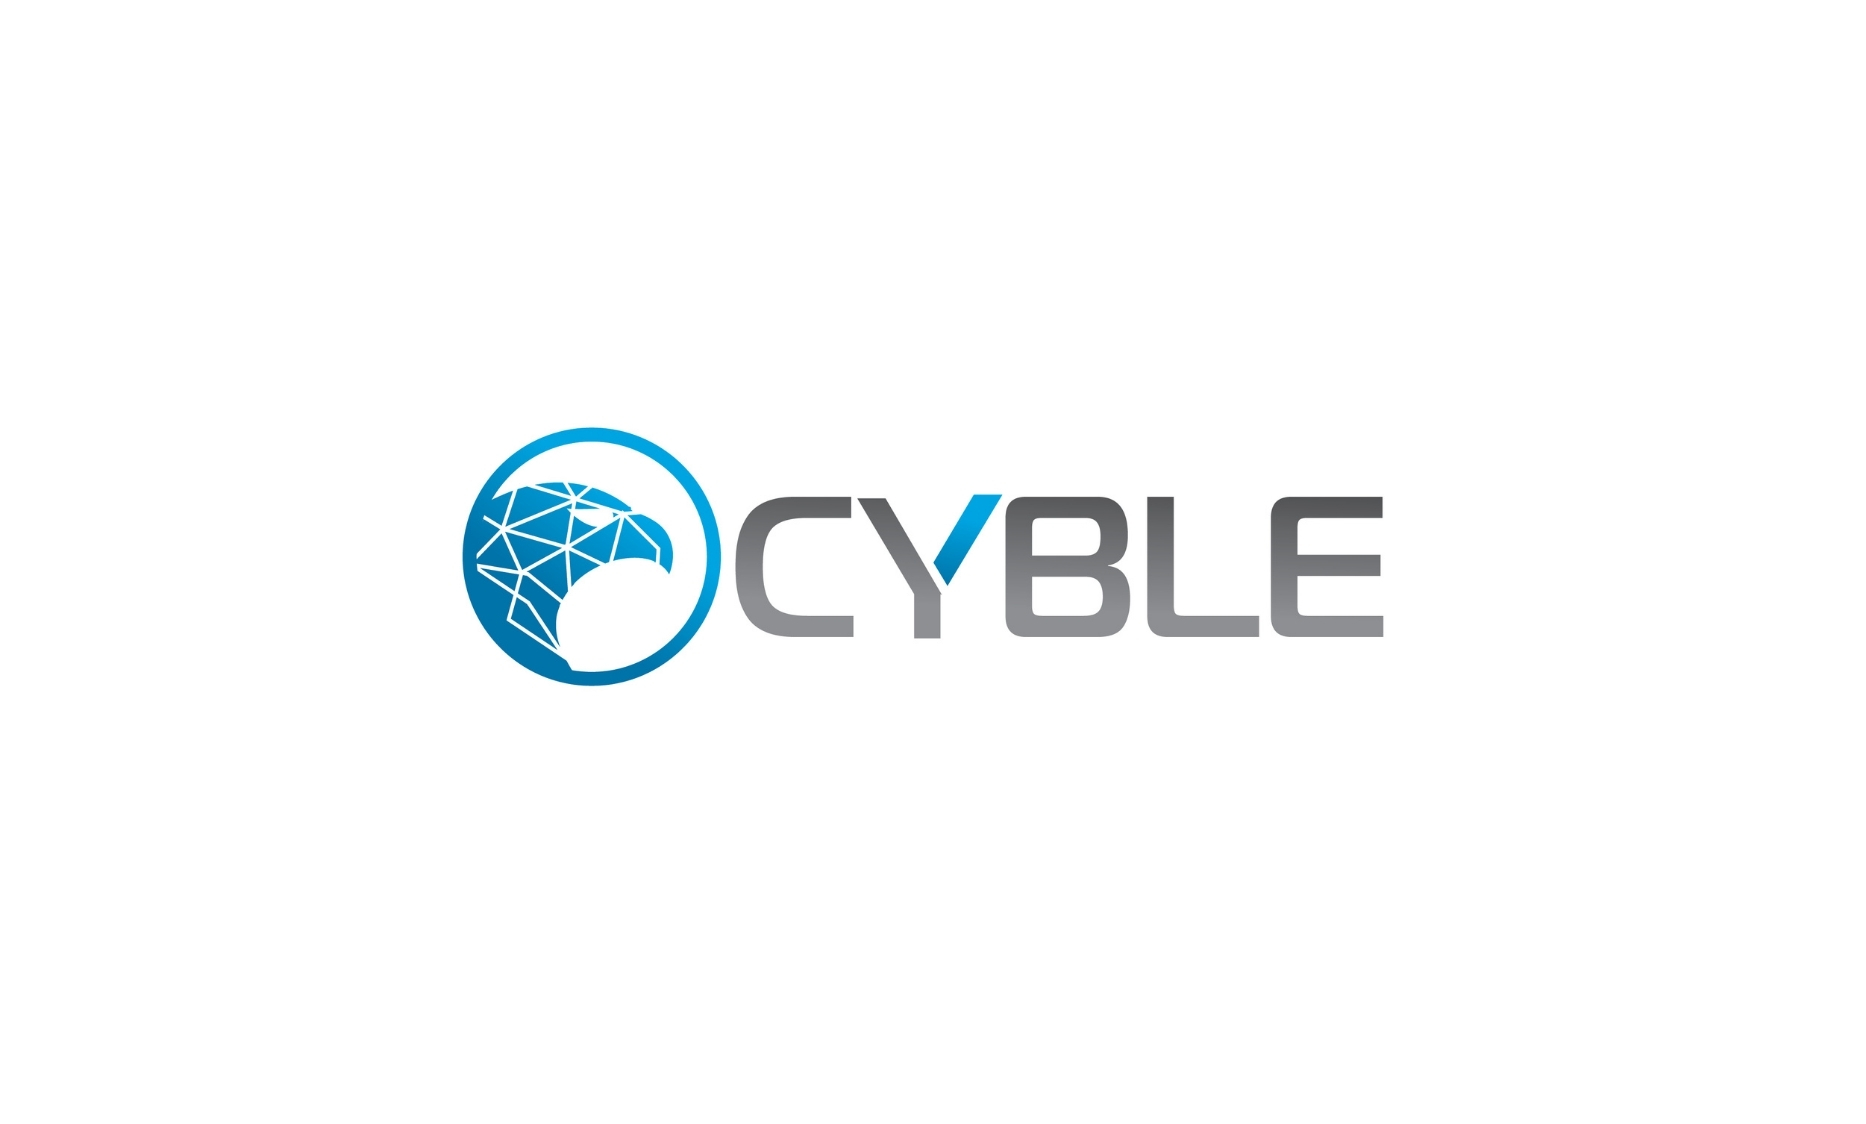 Cyble Announces $4 Million in Seed Funding - Digpu News